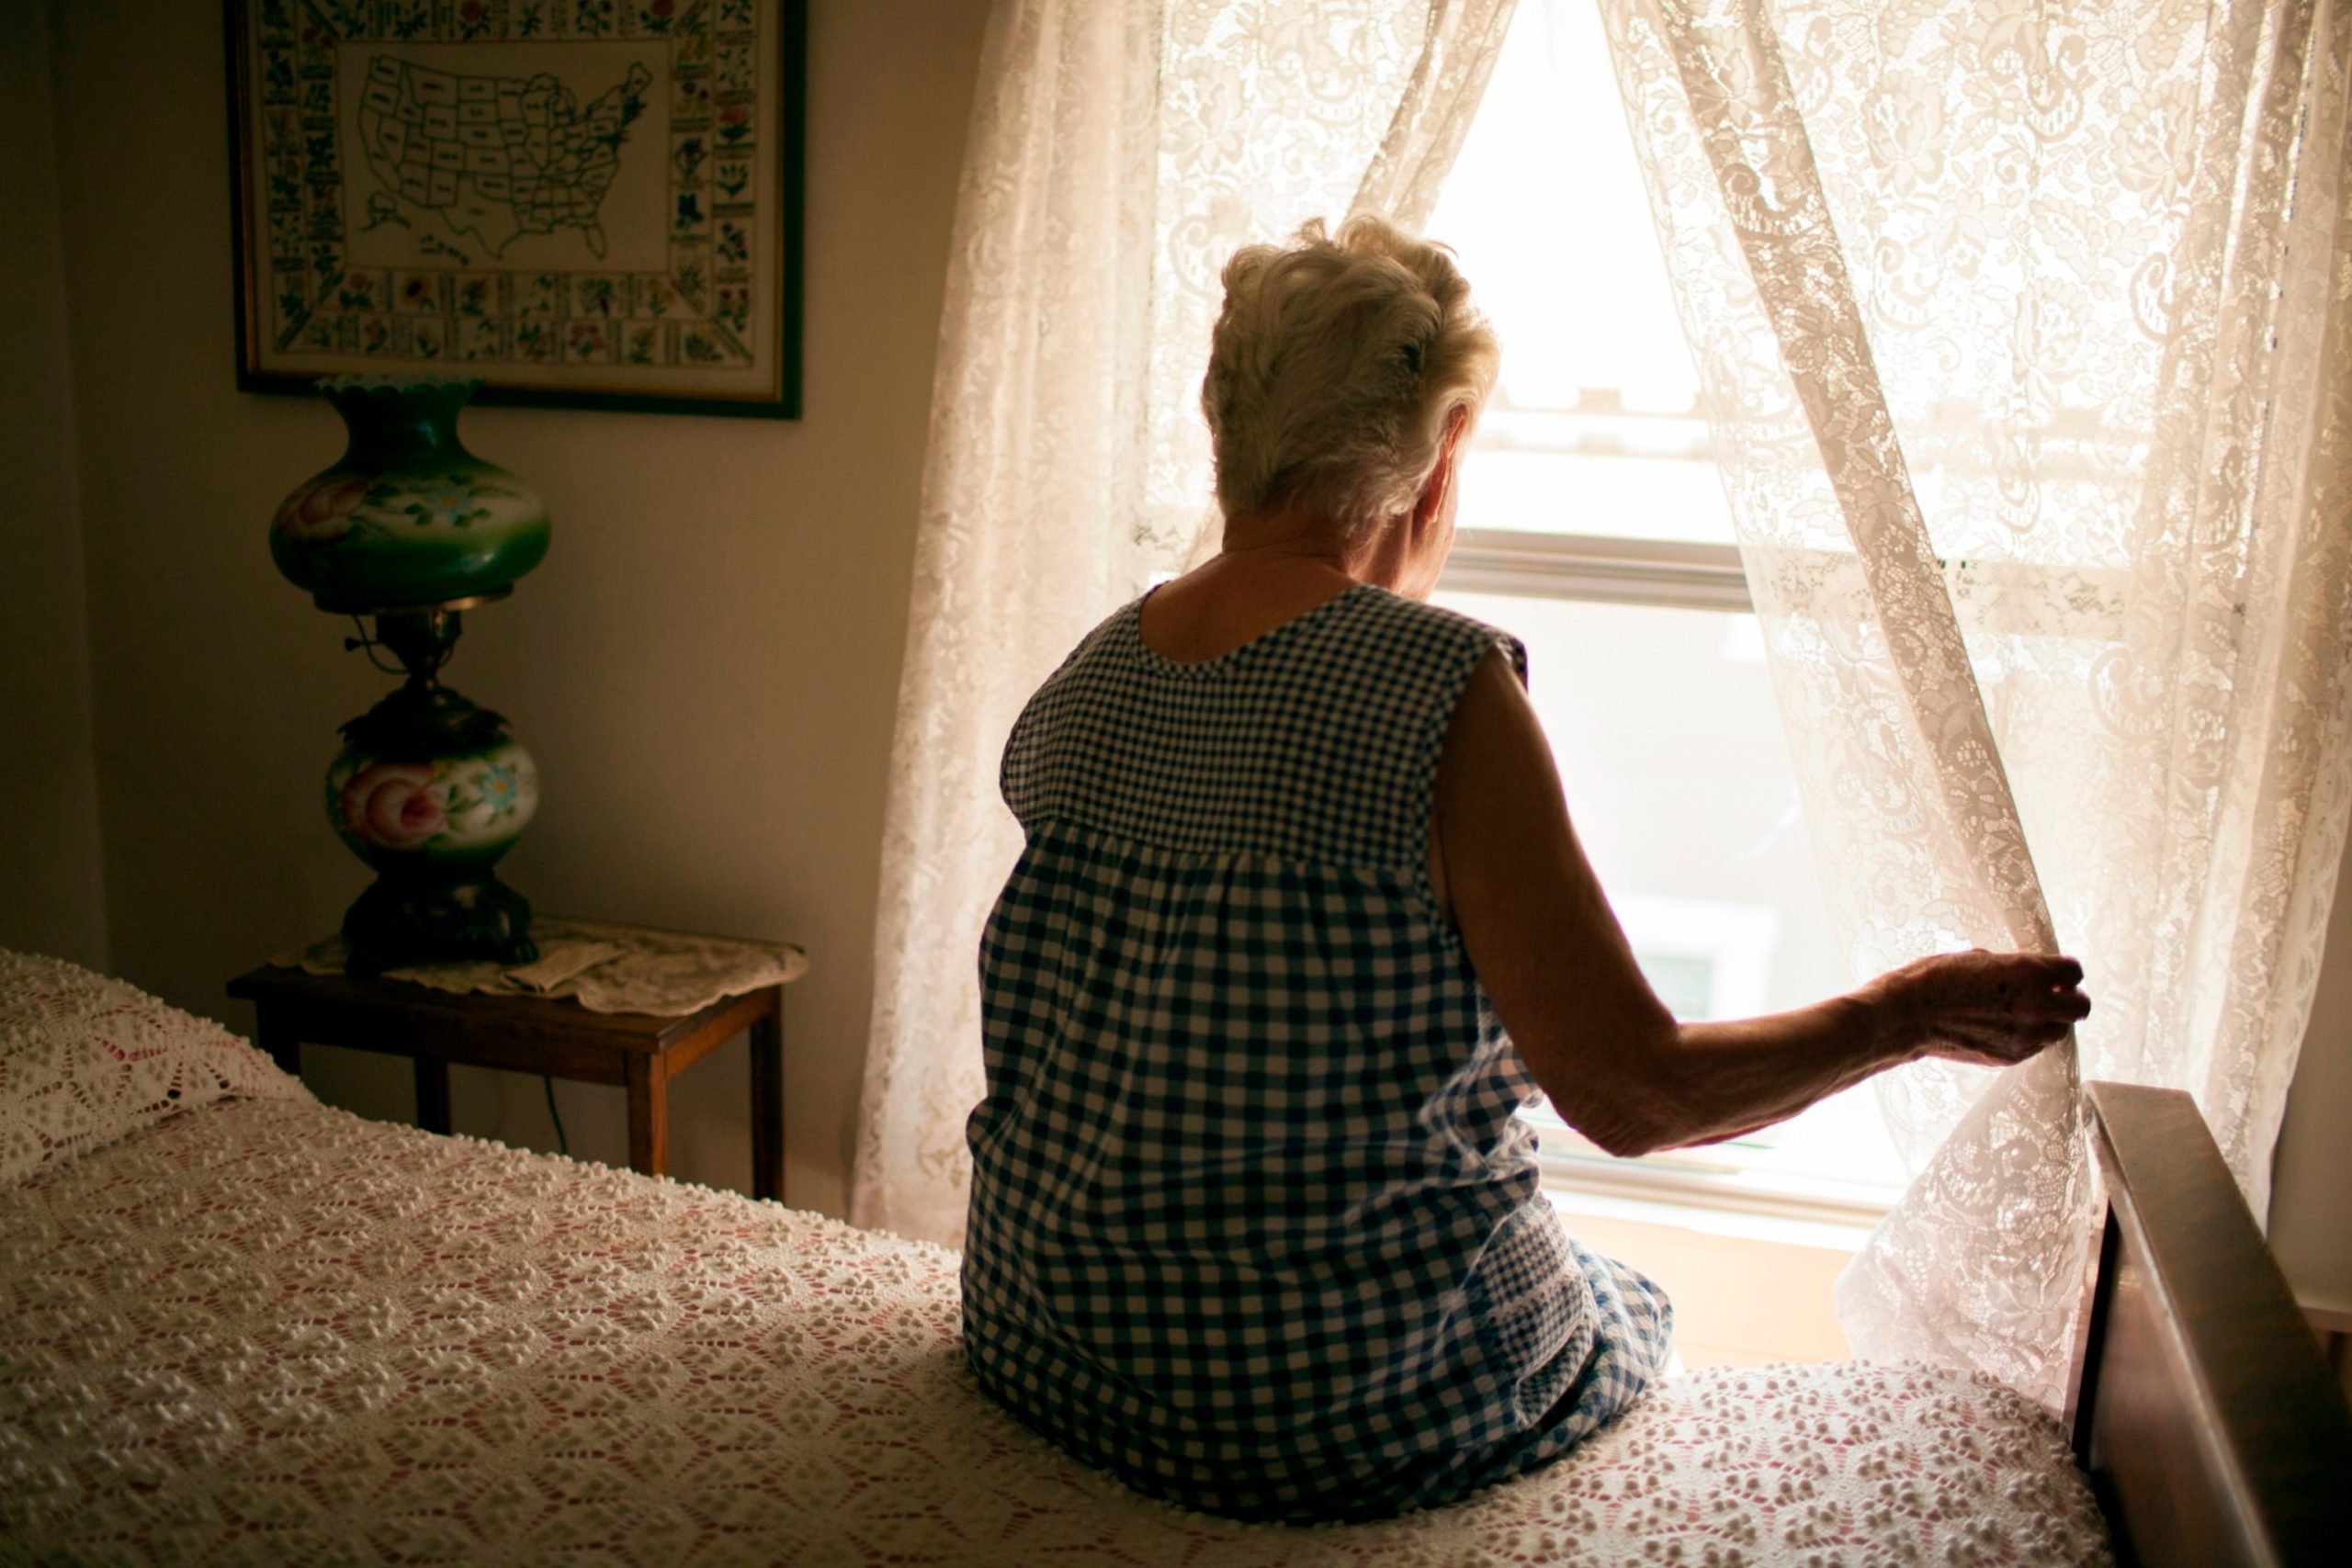 Study finds that long-term loneliness increases risk of stroke